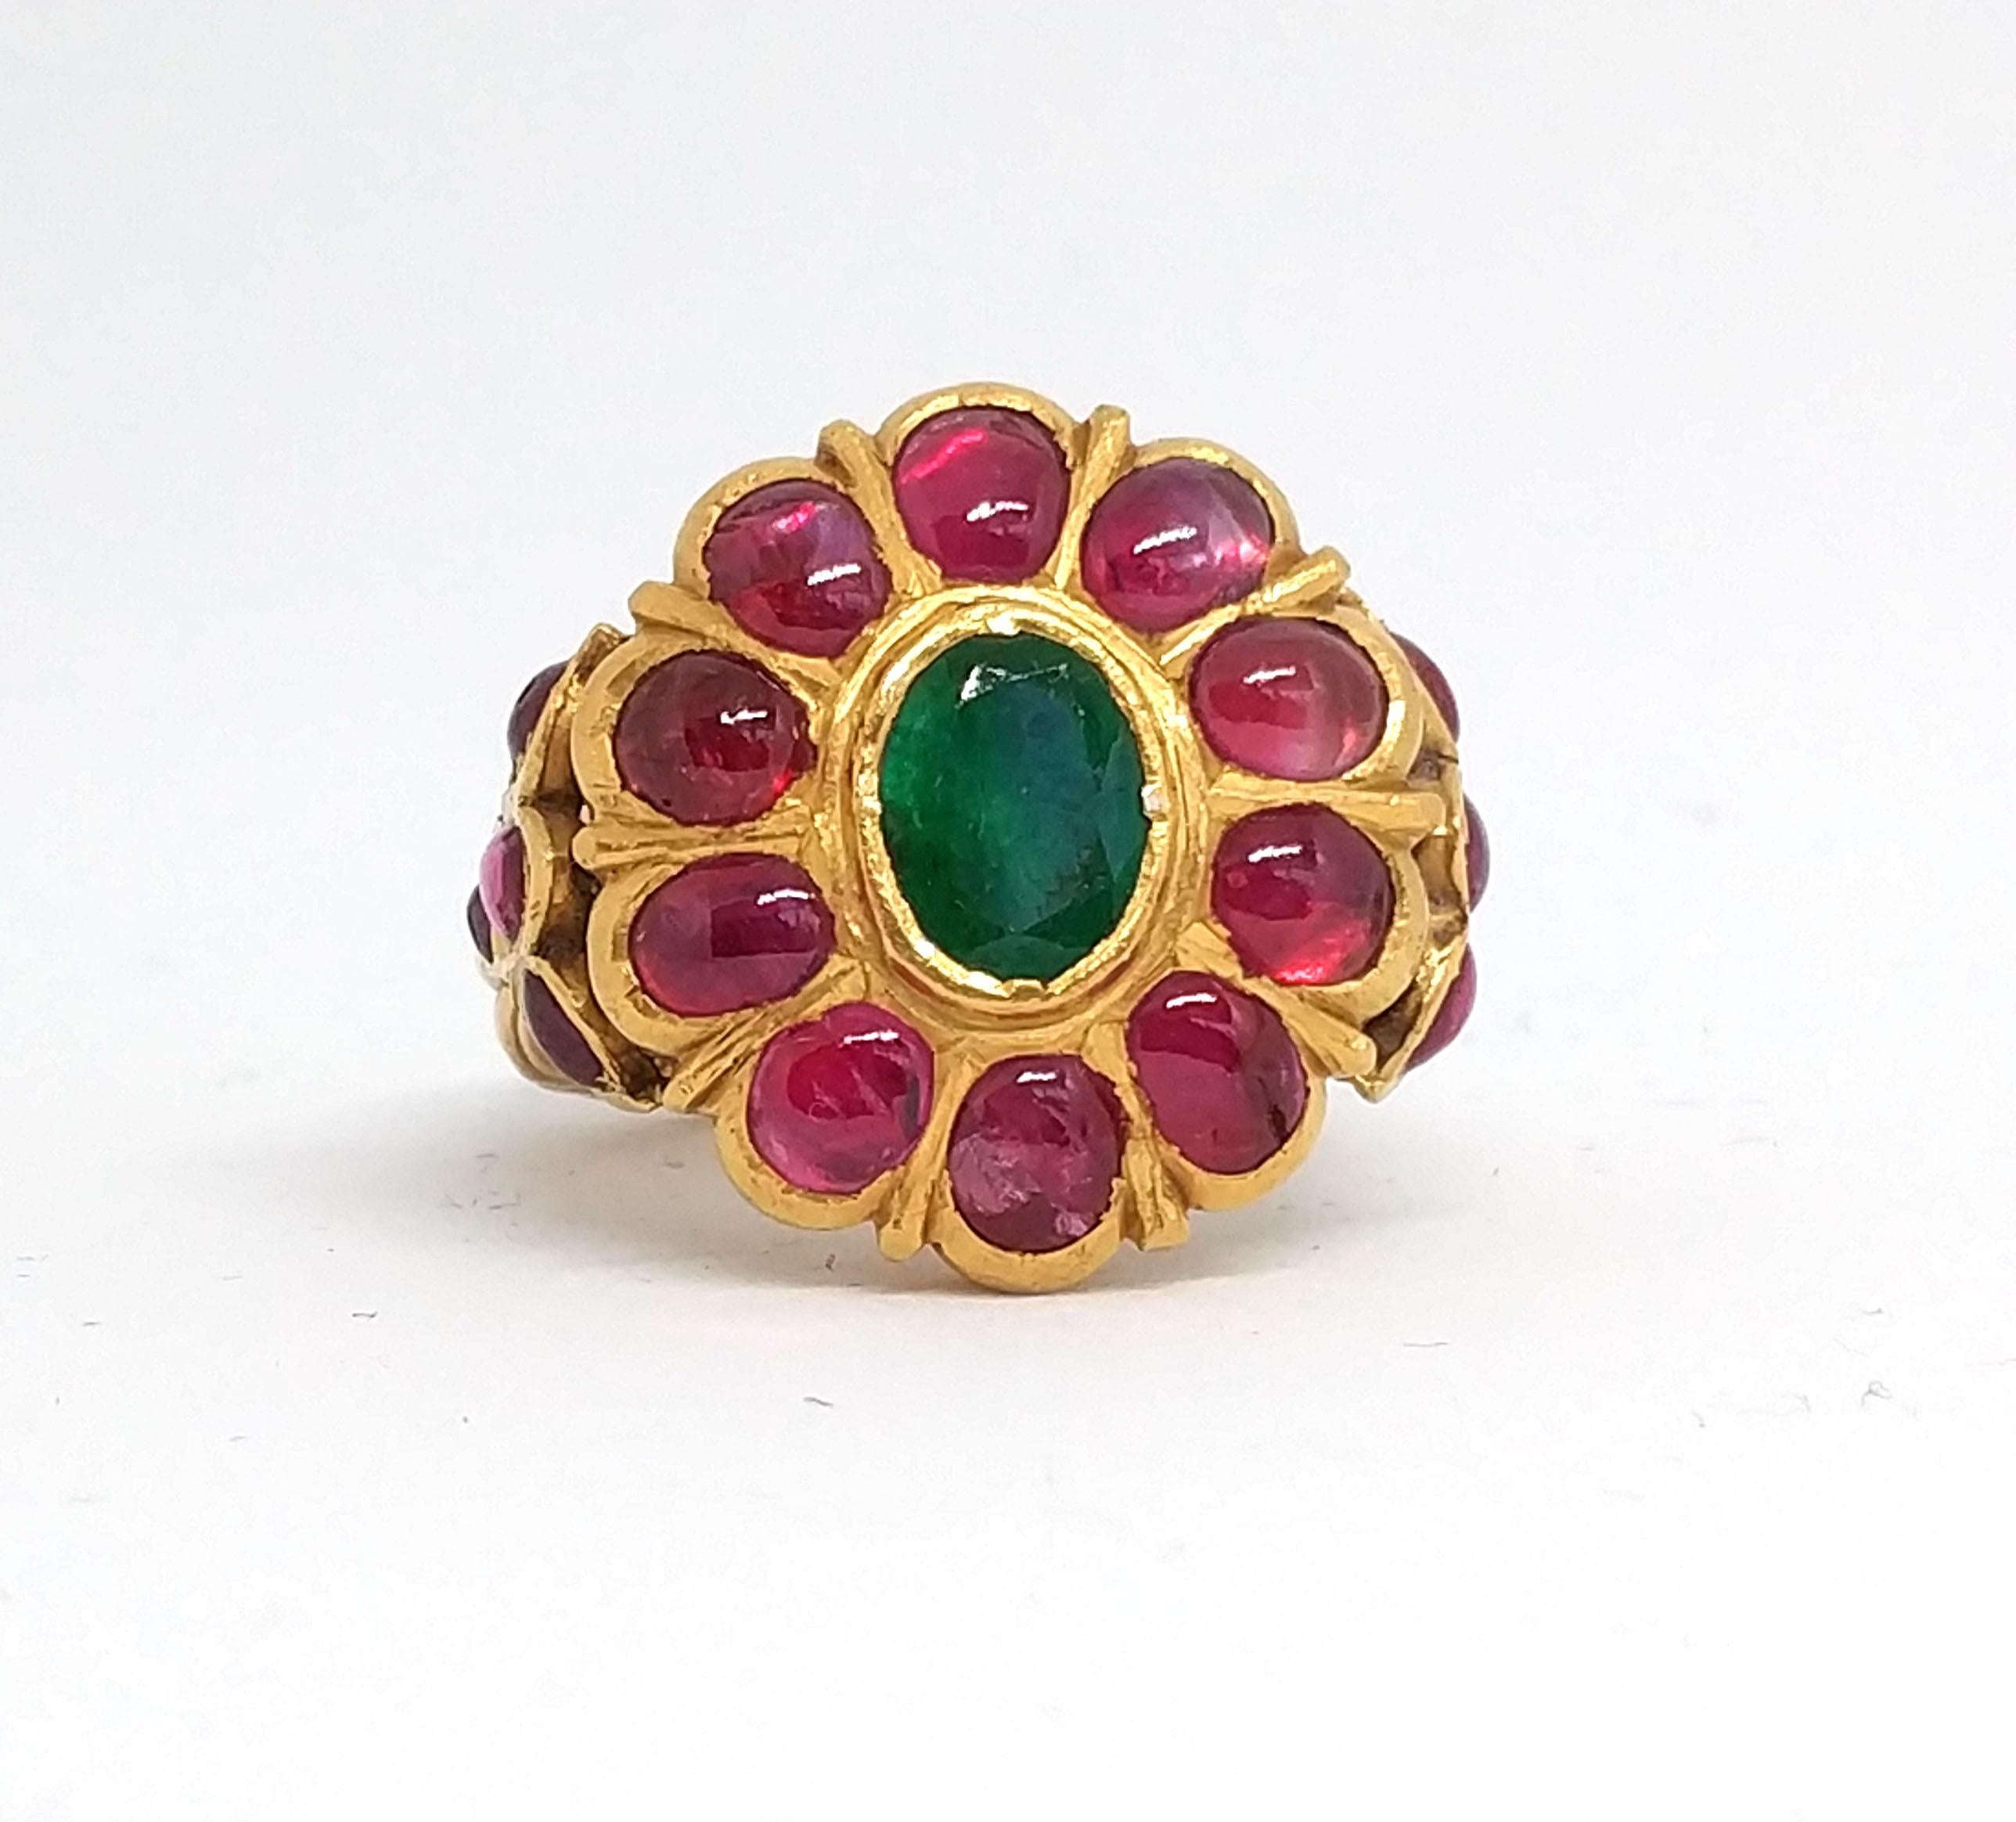 Antique Royal 5.5 carat Ruby and 3 carat Emerald Ring in 23 Carat Gold For Sale 7